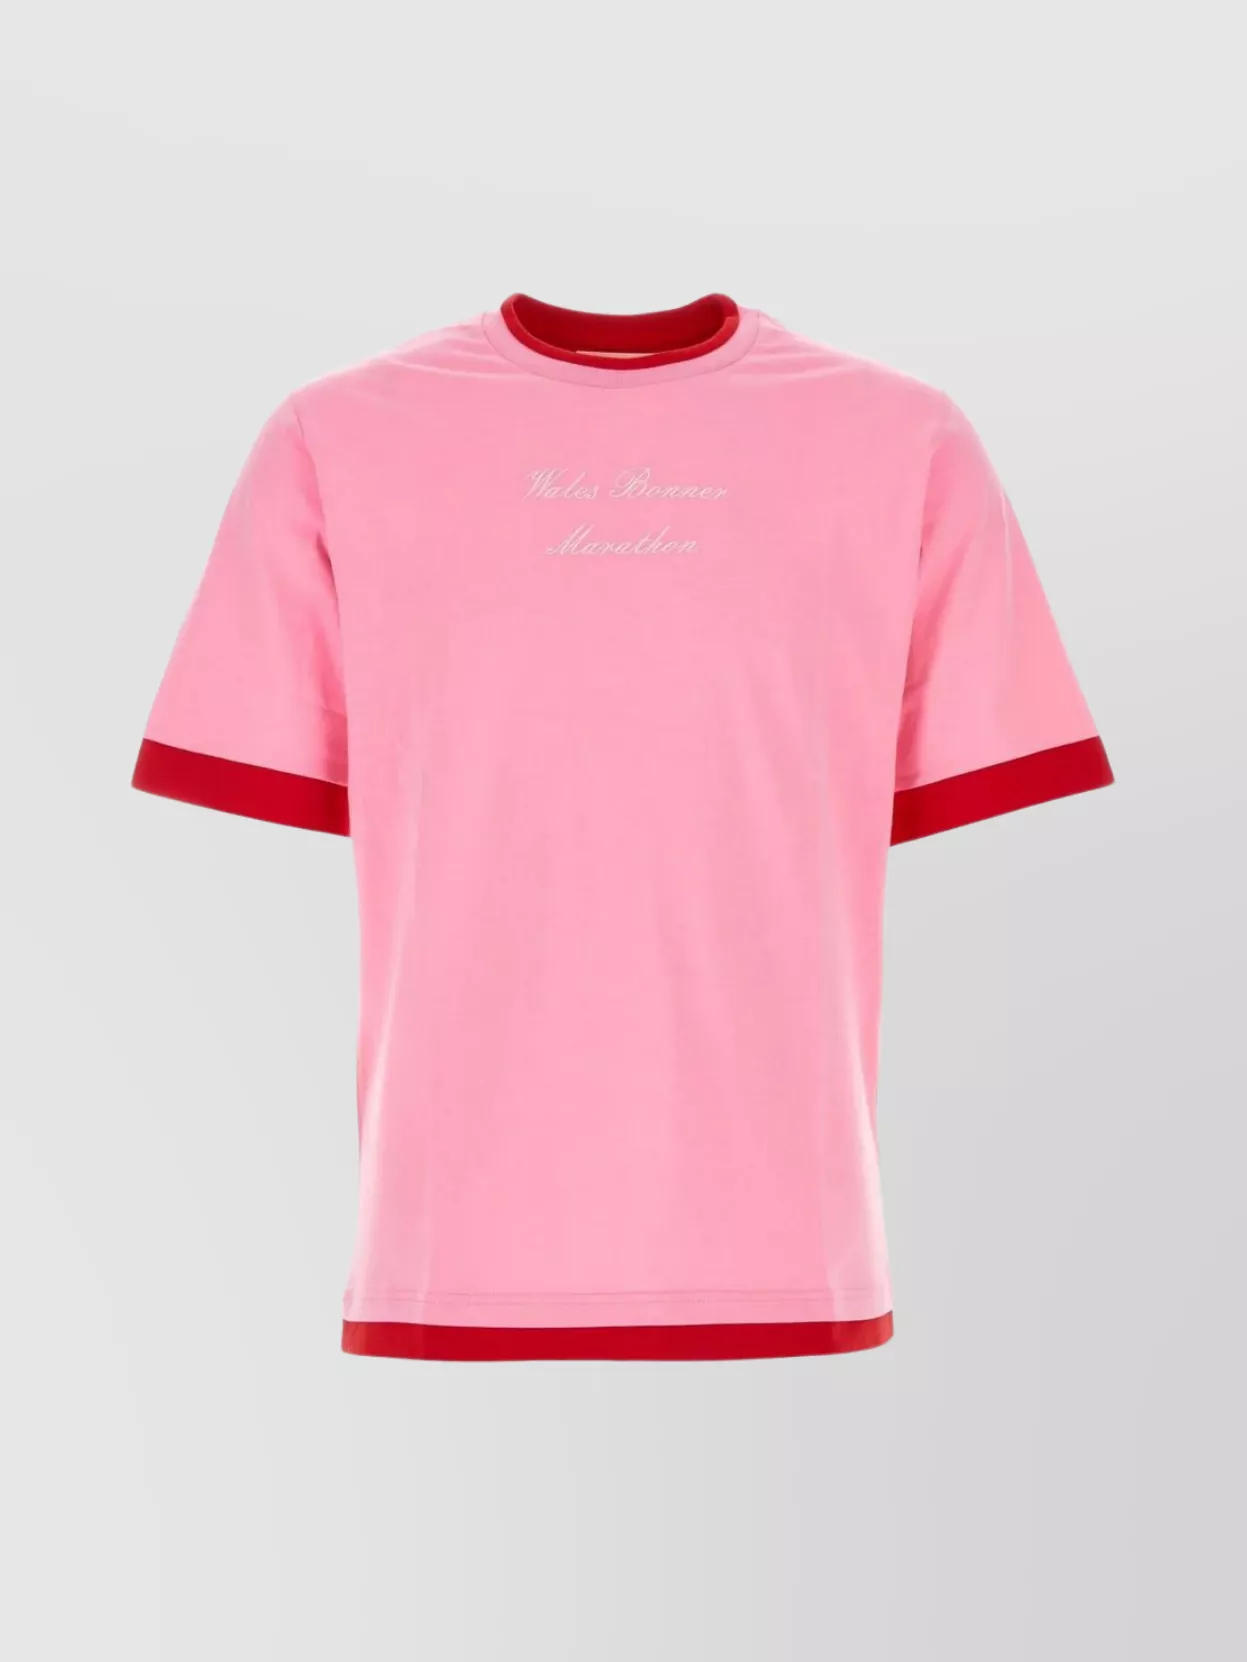 Wales Bonner Marathon T-shirt With Contrasting Fabric Inserts In Pink